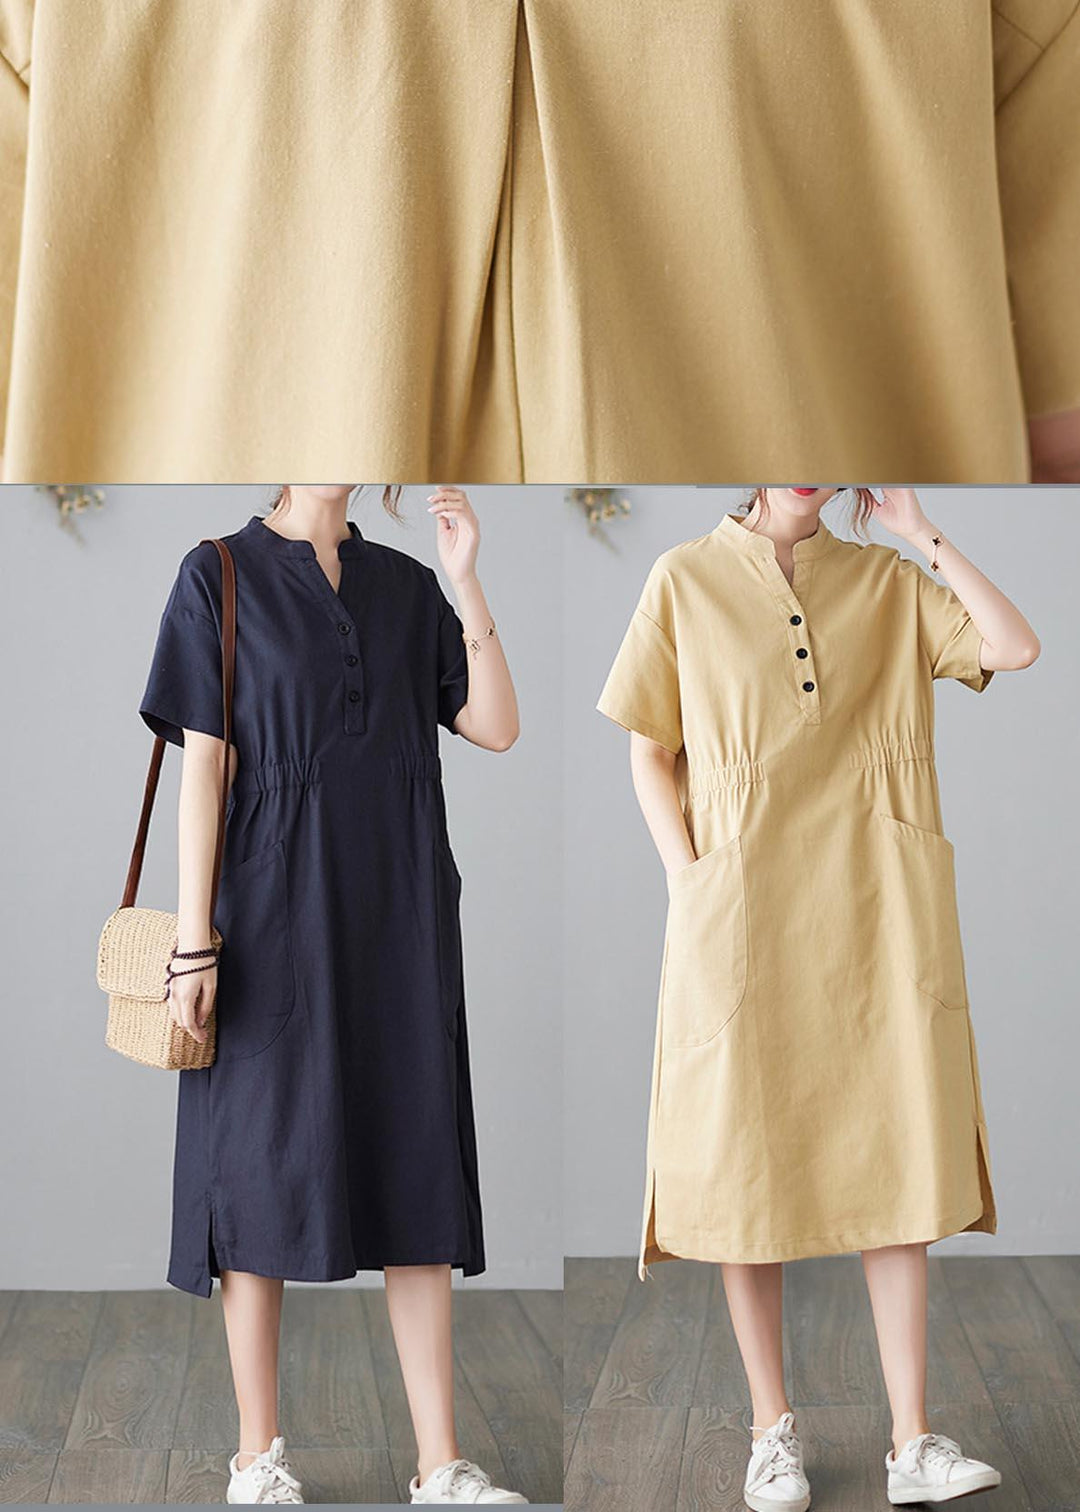 Organic Yellow Cinched Pockets Summer Cotton Dress - Omychic